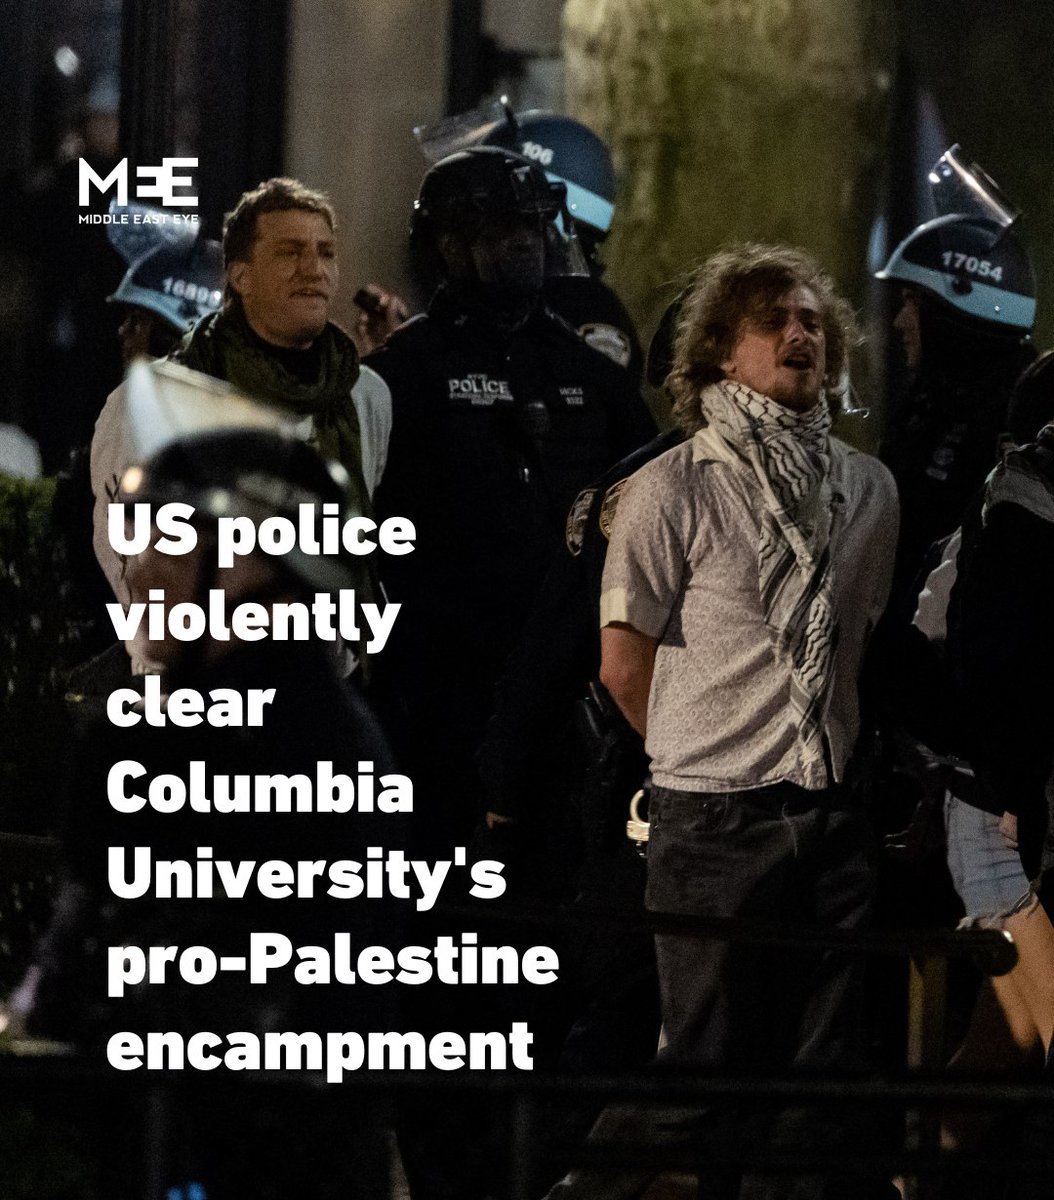 NYPD violently raided Columbia University late on Tuesday to arrest pro-Palestinian demonstrators.
NYPD  arrest dozens of pro-Palestinian demonstrators.
Because they were peacefully protesting to halt the genocide in Gaza.
#ColumbiaUniversity #StudentsForGaza 
#StudentProtests